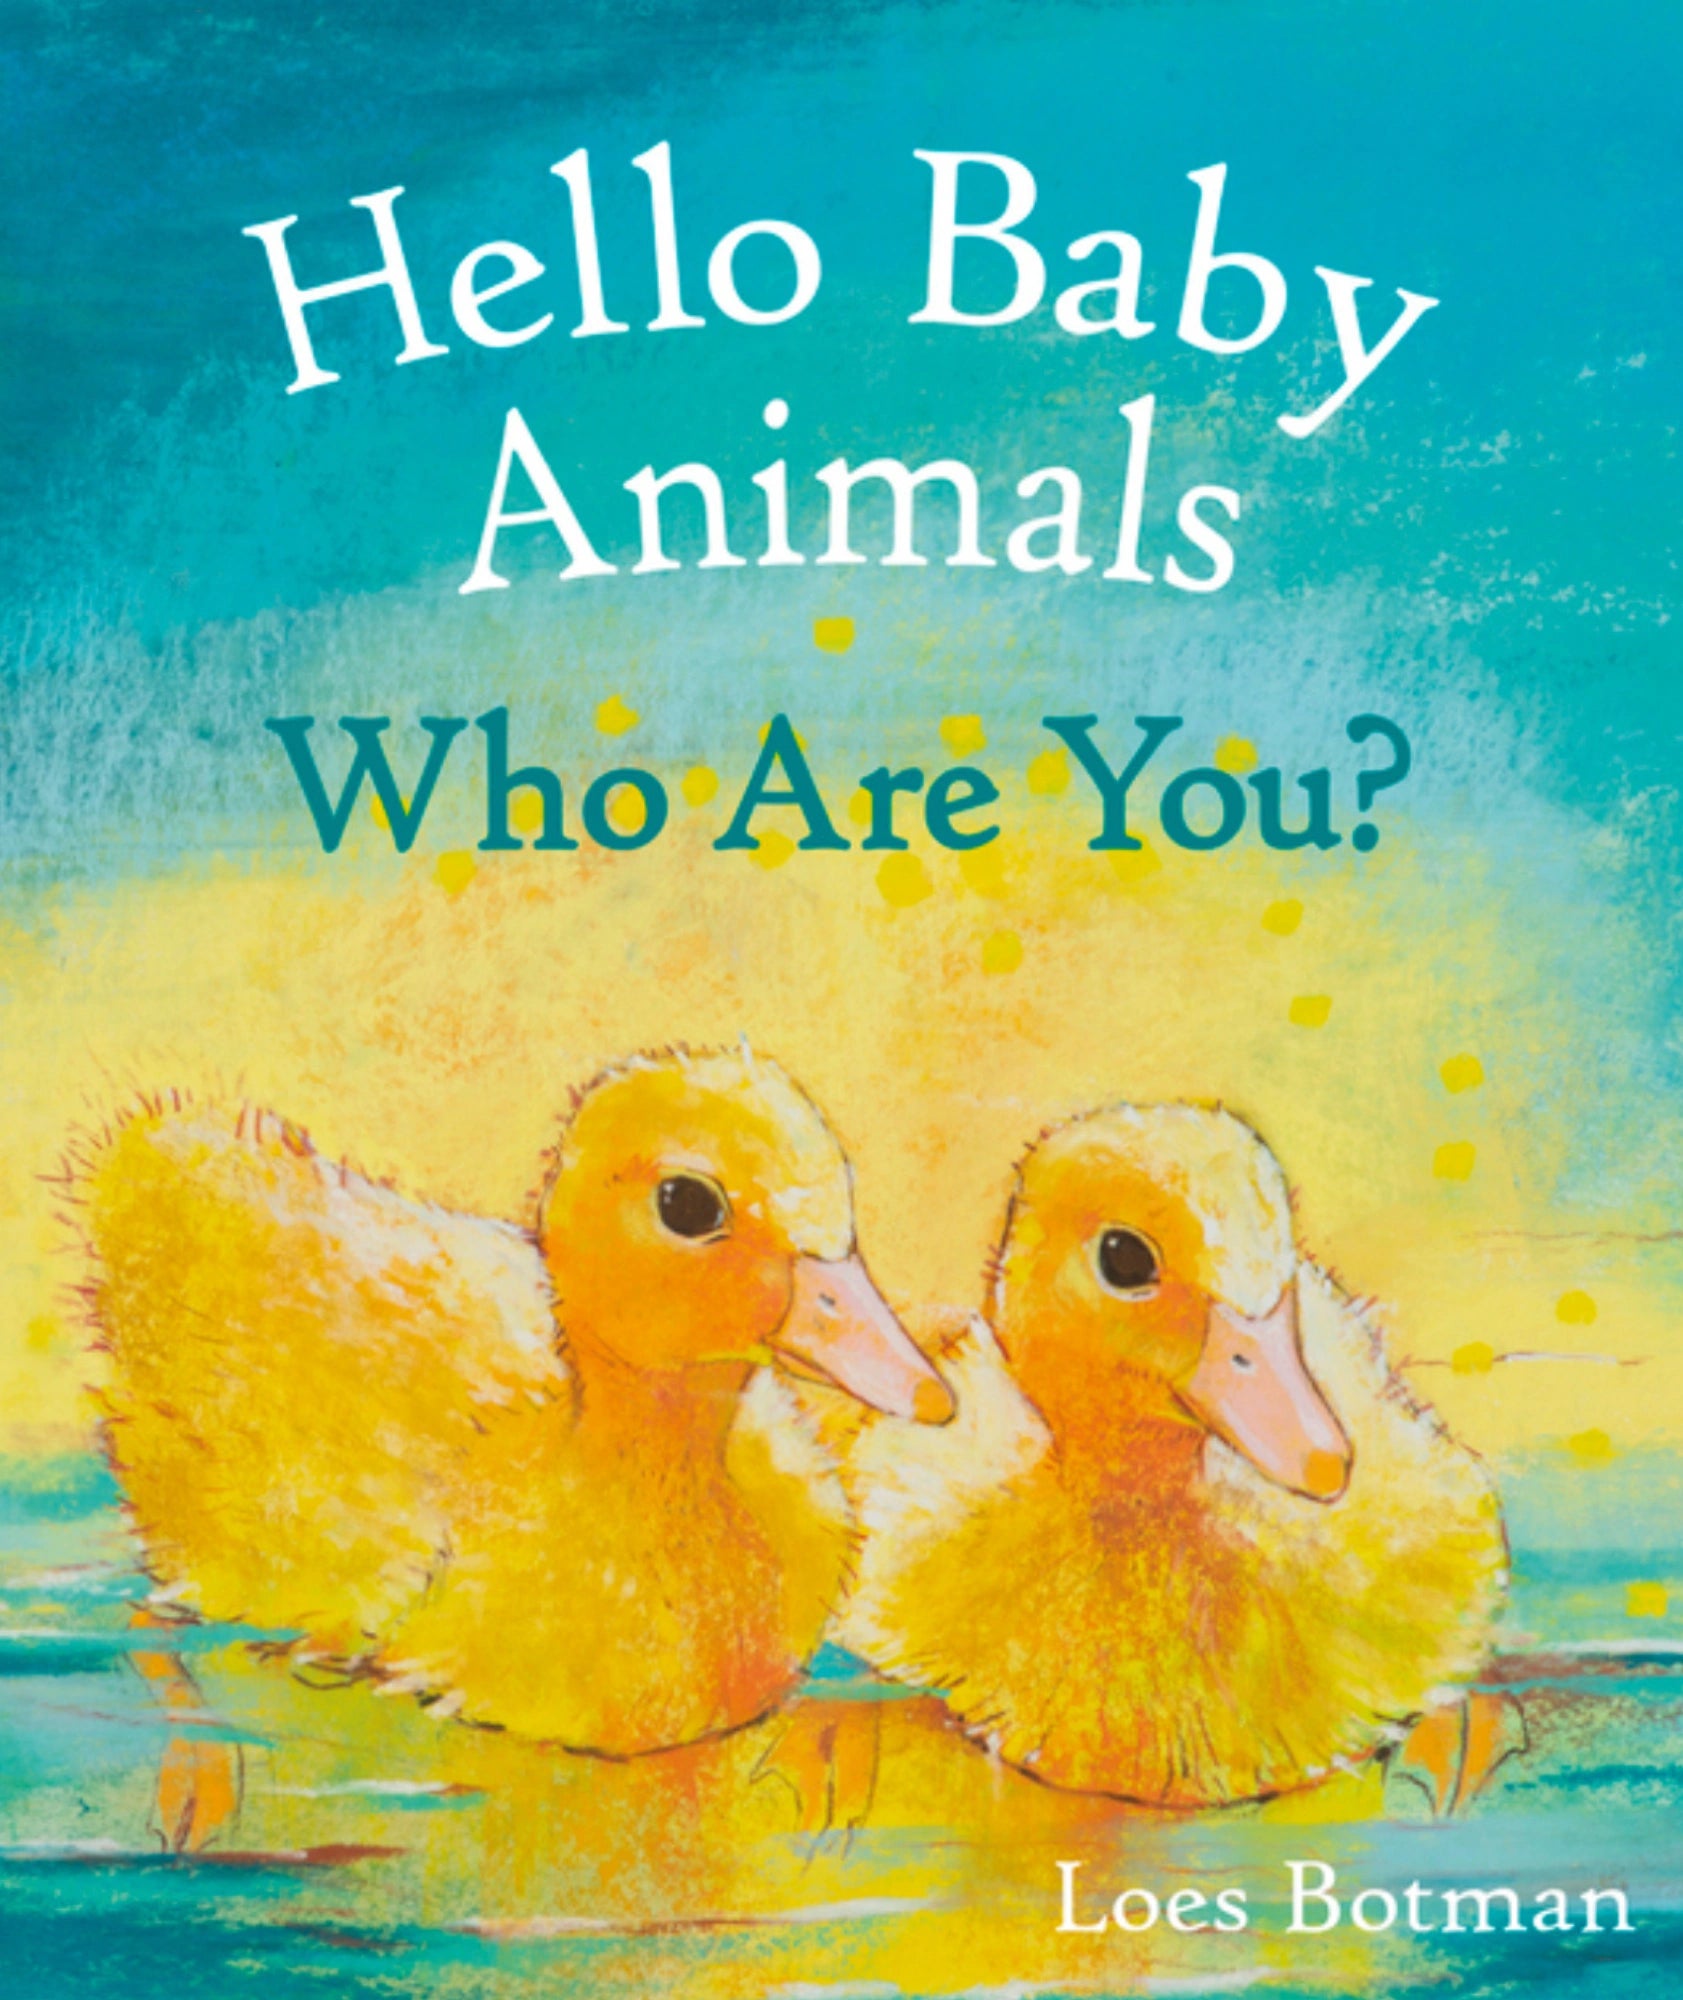 Books for Toddlers - Hello Baby Animals Who Are You? by Loes Botman